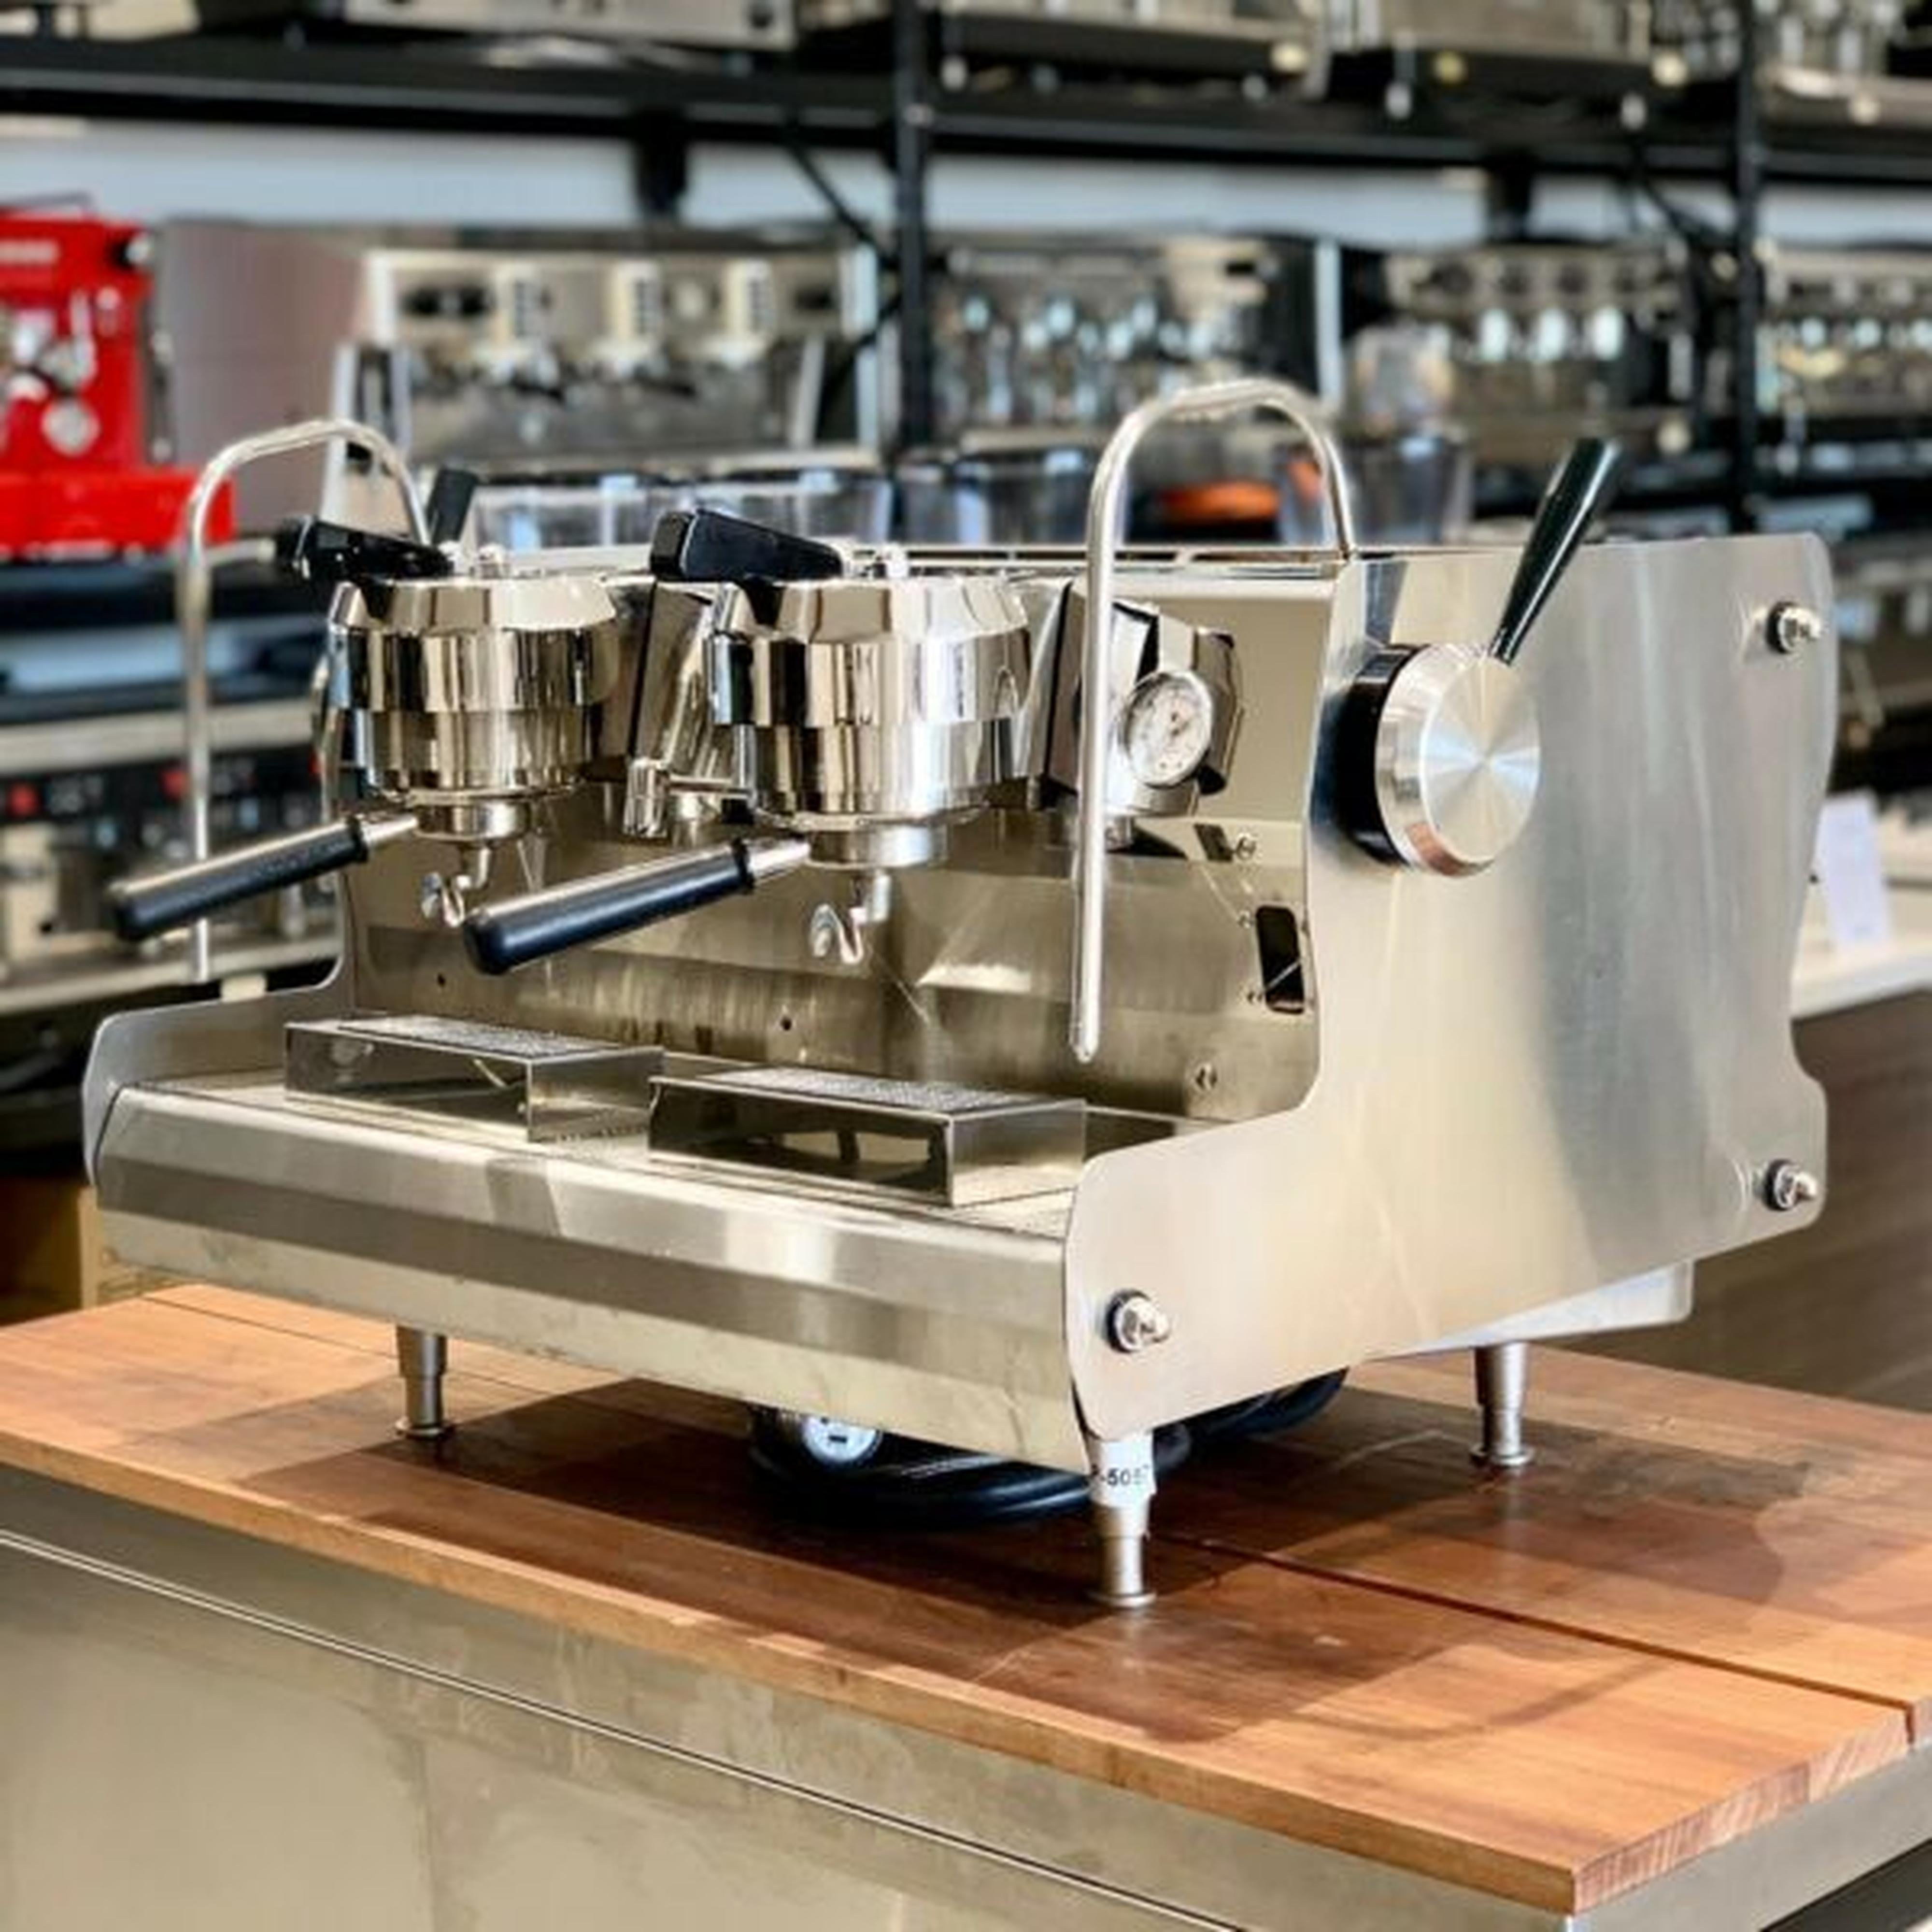 Beautiful 2 Group Synesso Cyncra Commercial Coffee Machine